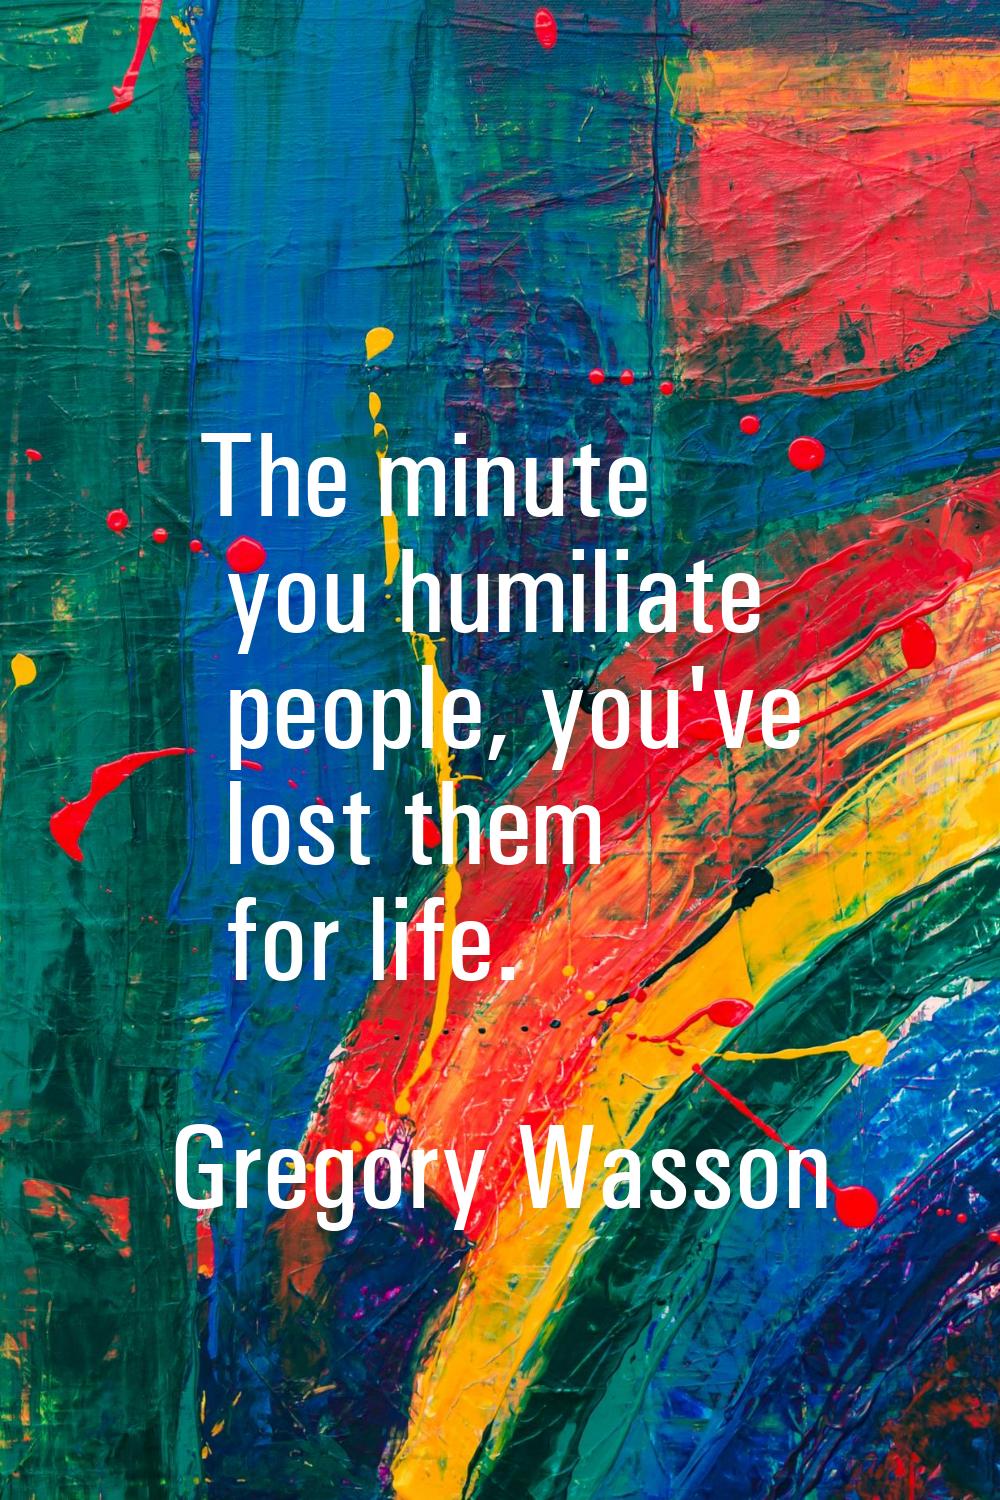 The minute you humiliate people, you've lost them for life.